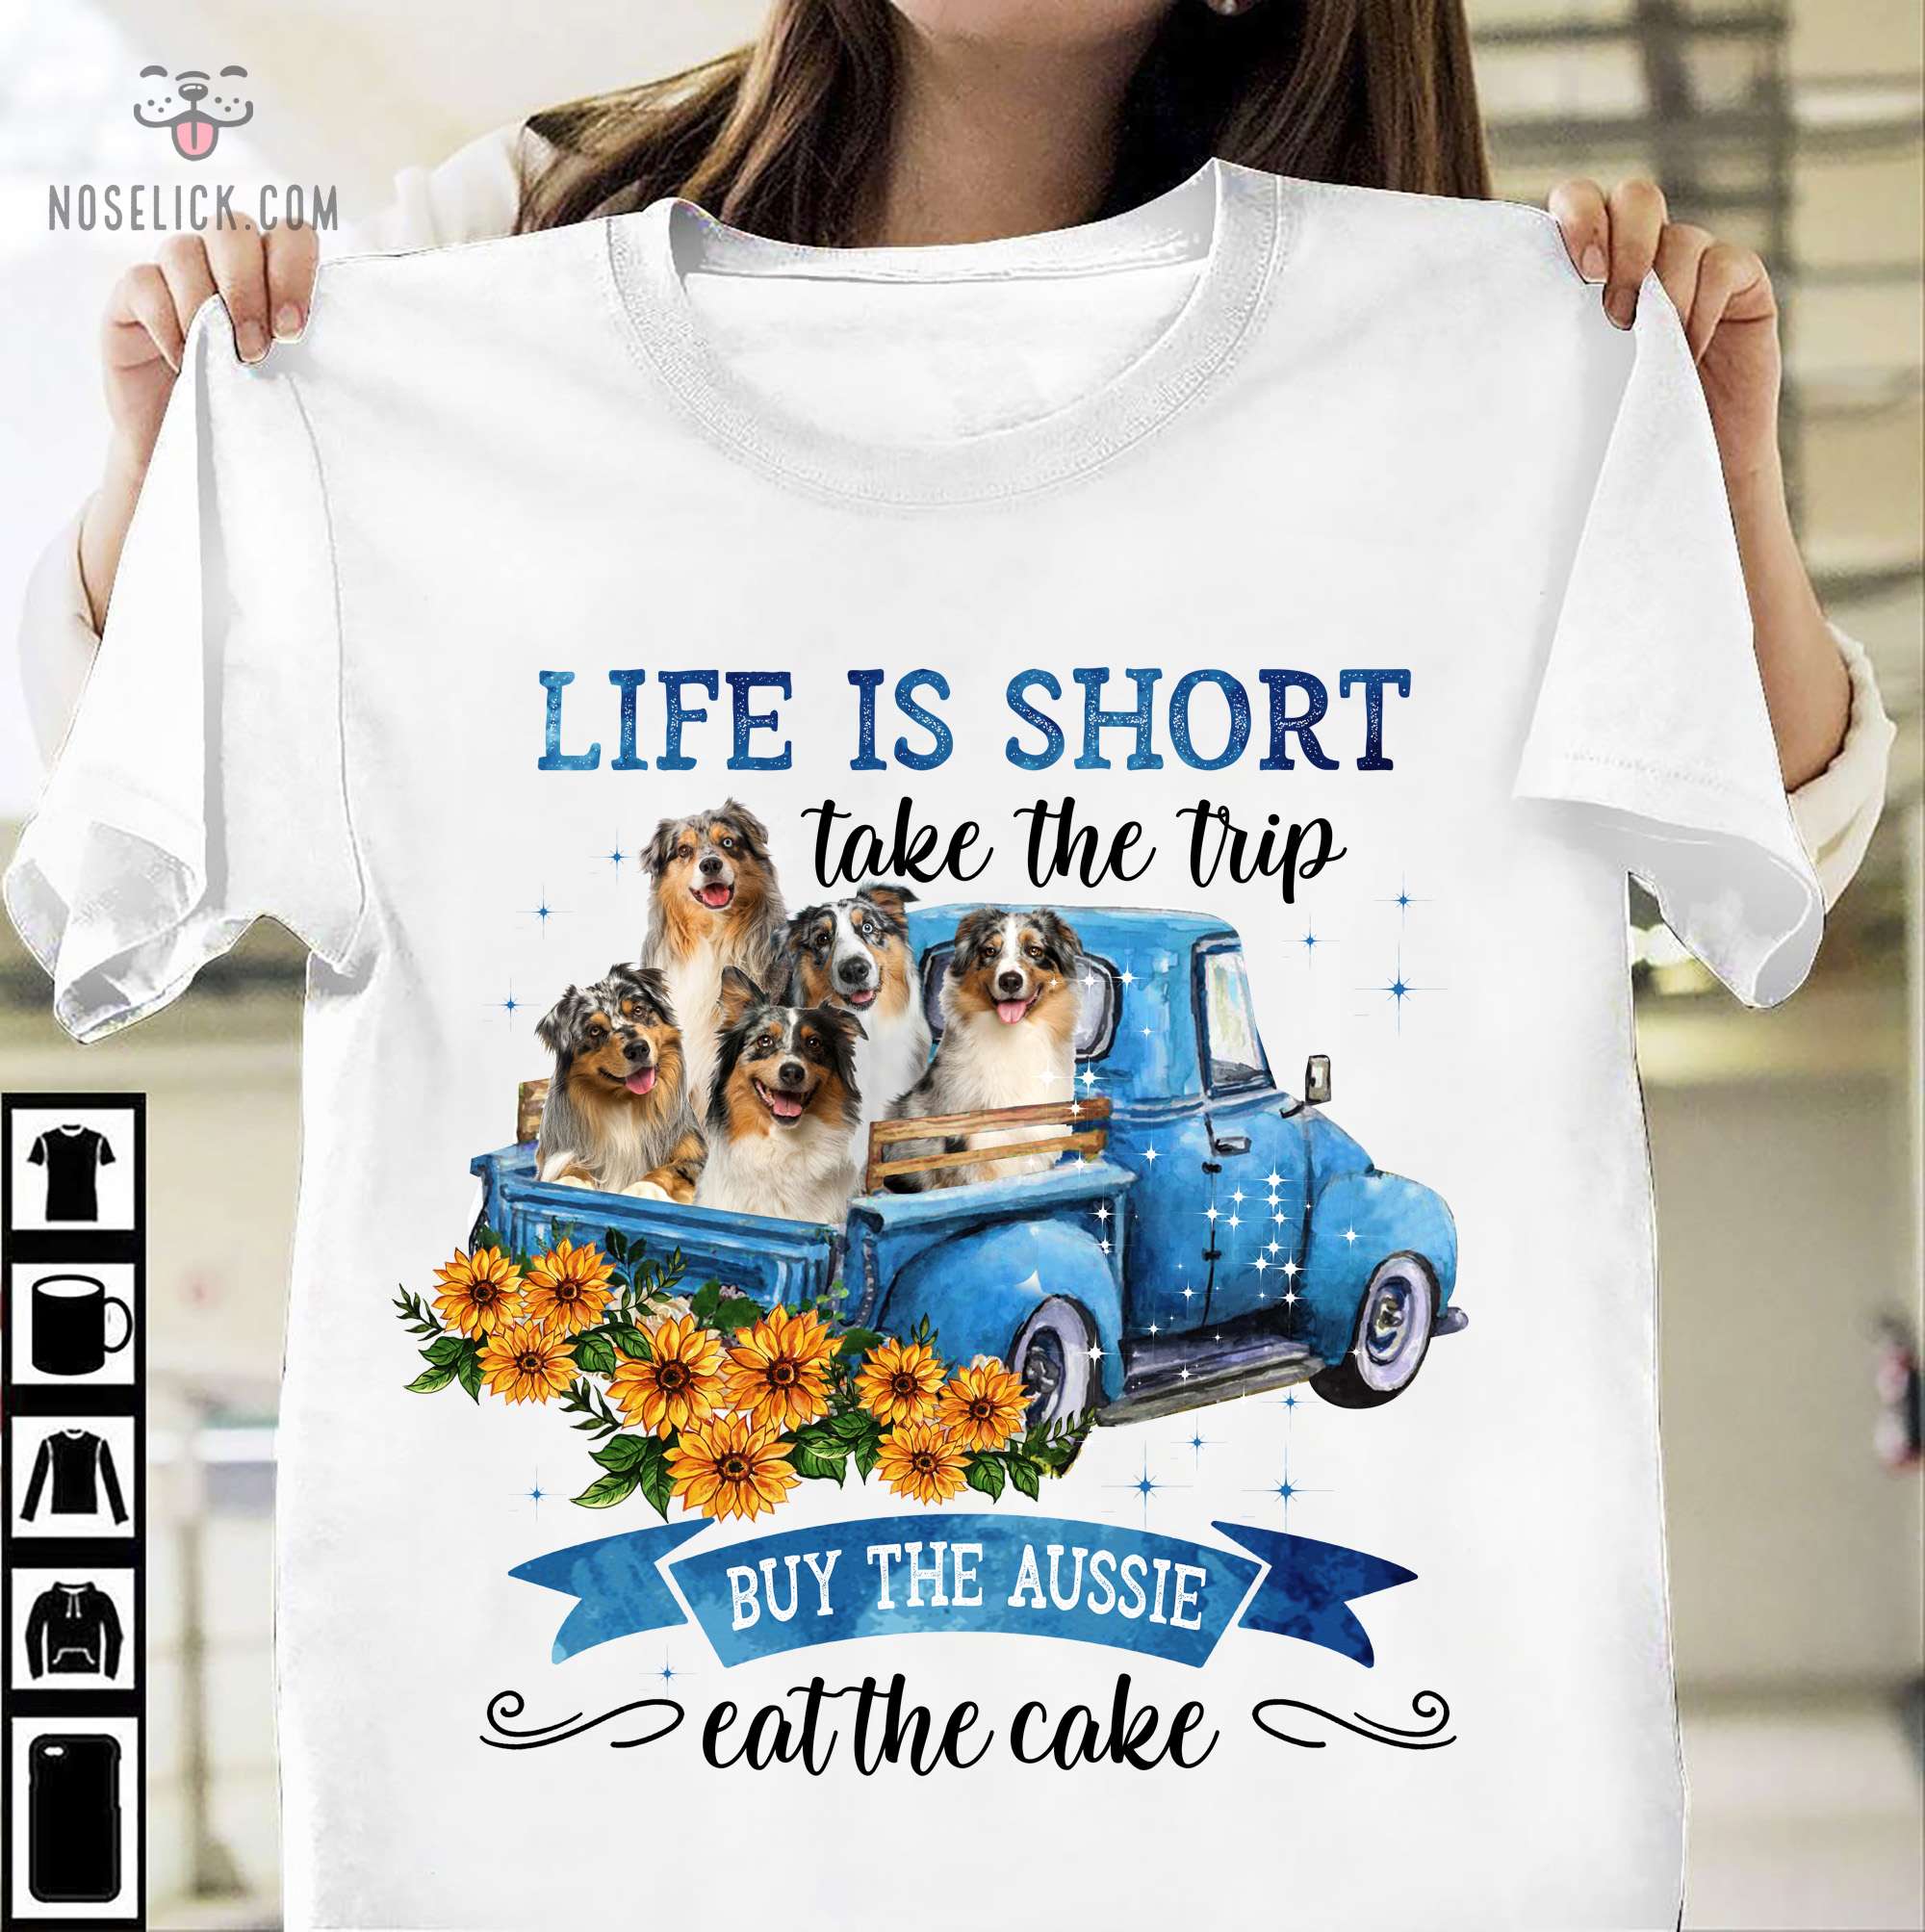 Life is short take the trip buy the Aussie eat the cake - Aussie on truck